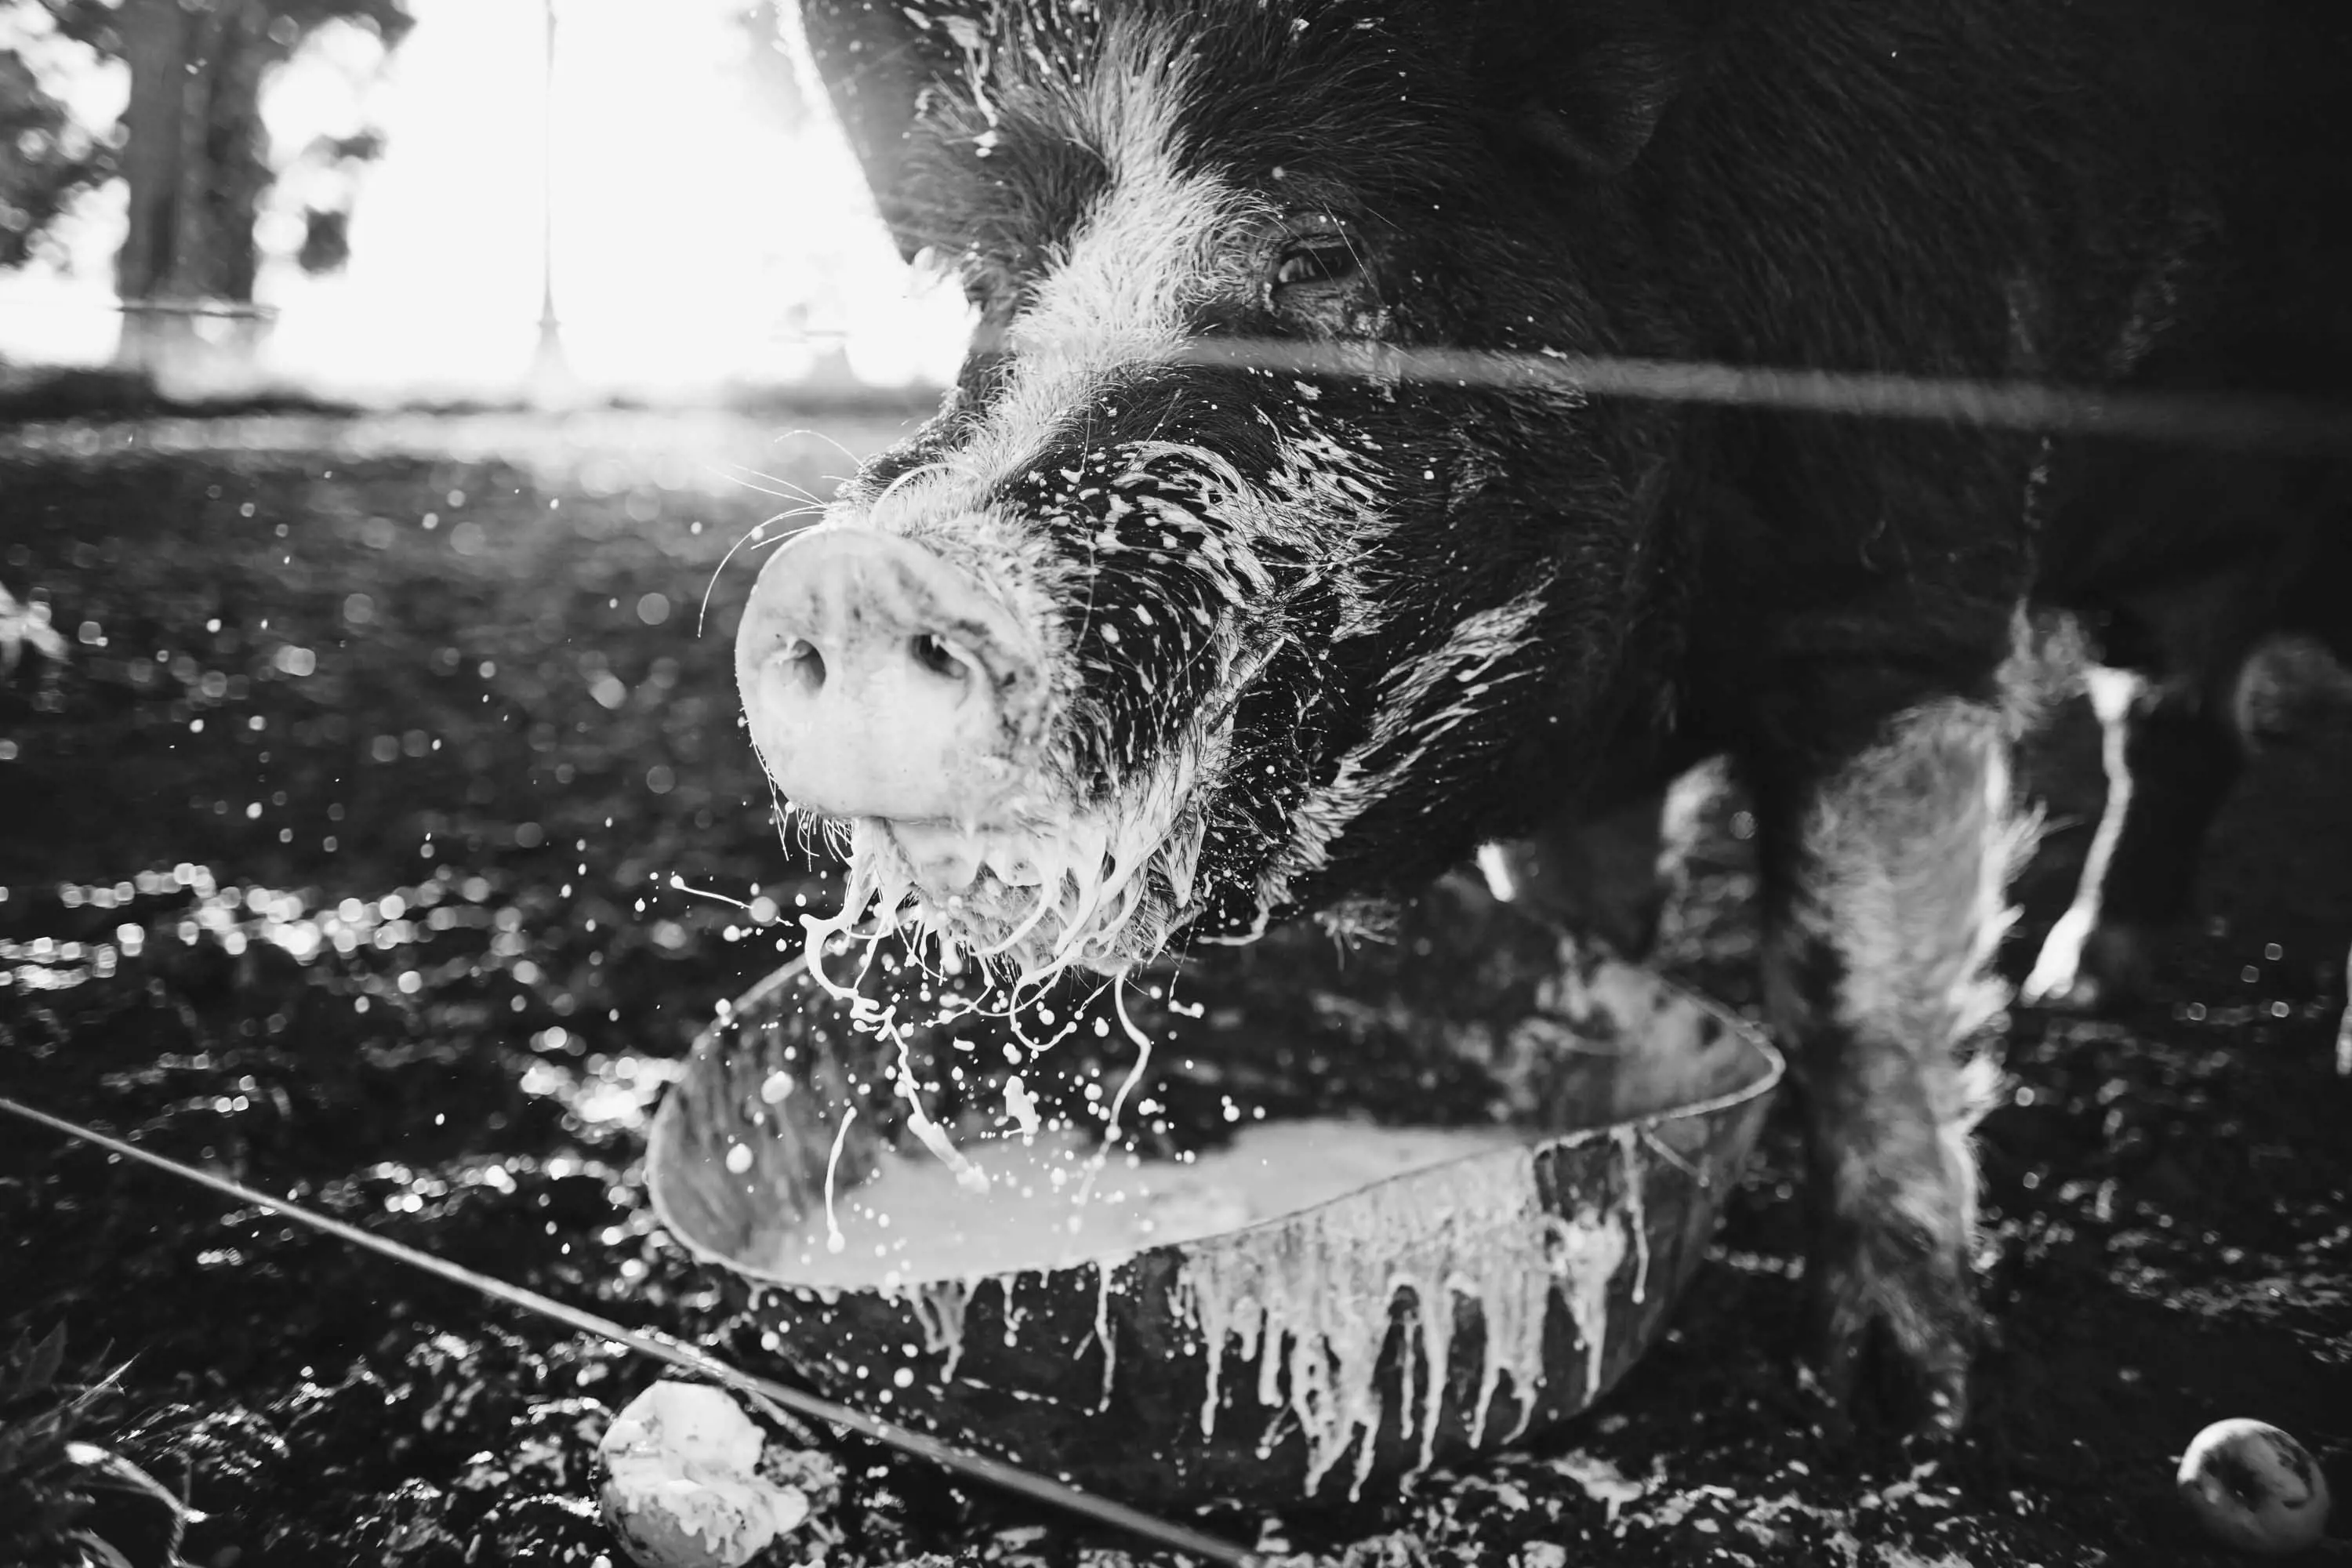 A large hairy pig enjoys food form a small bowl.